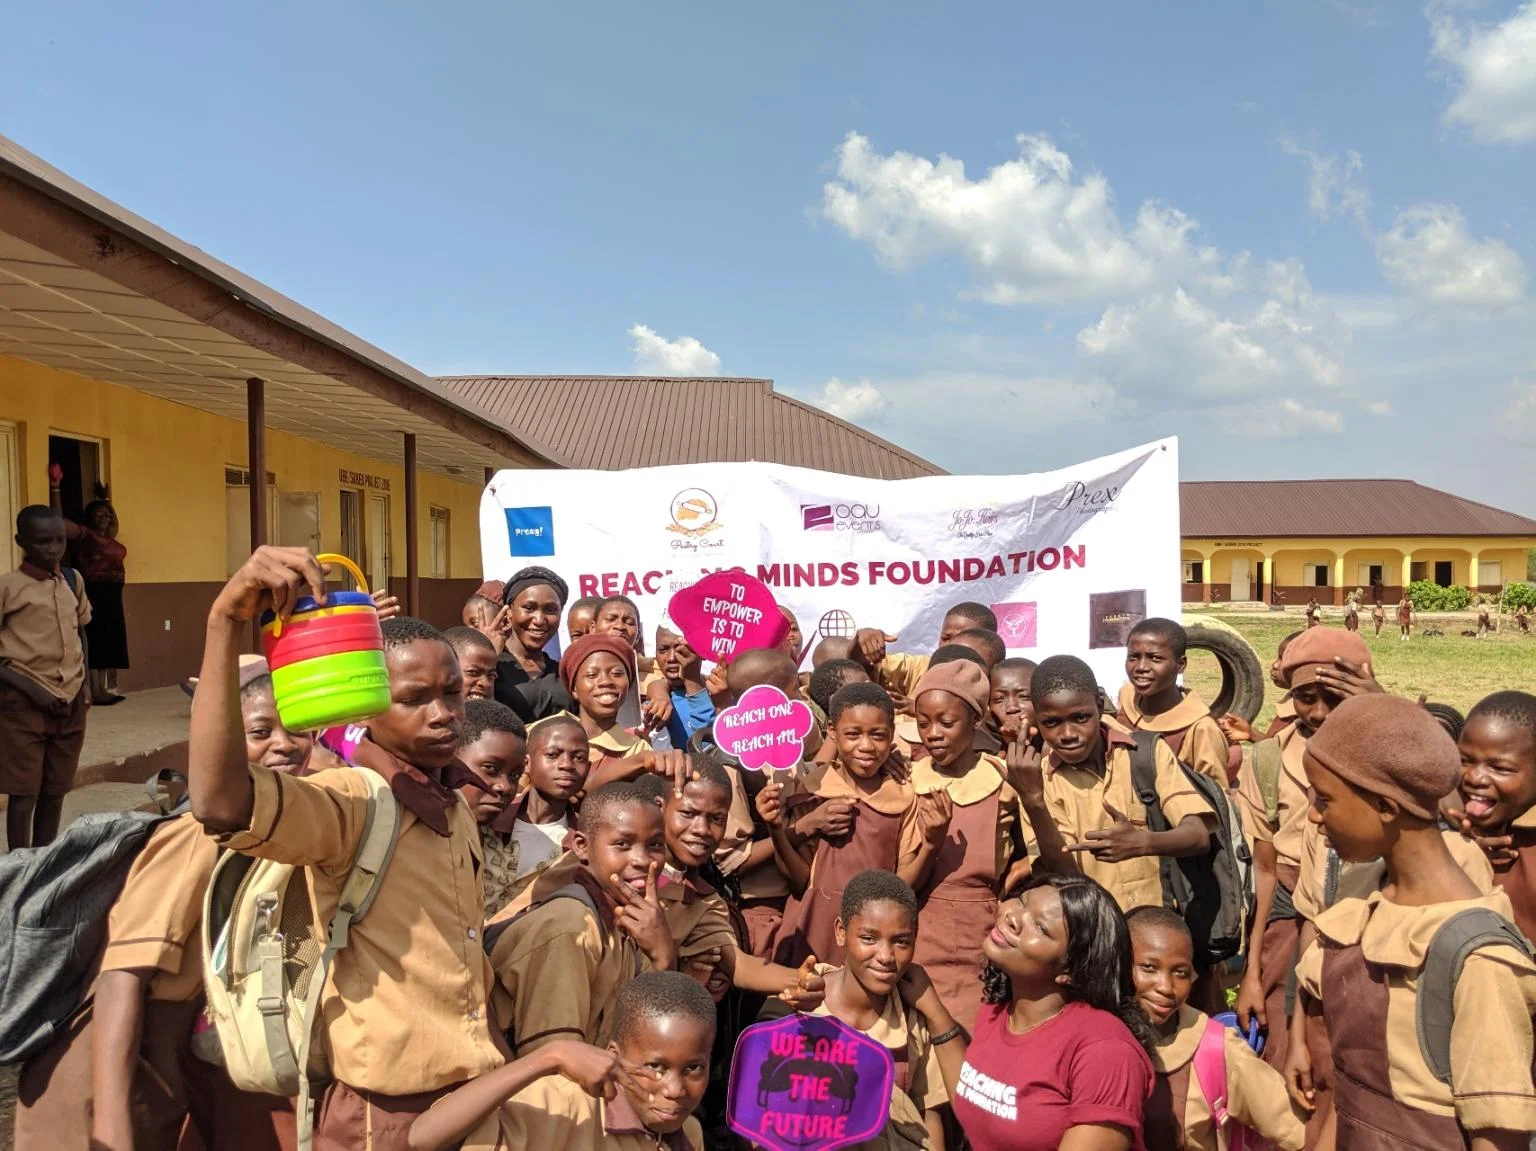 RMF on an outreach to schools in Osun, Nigeria.